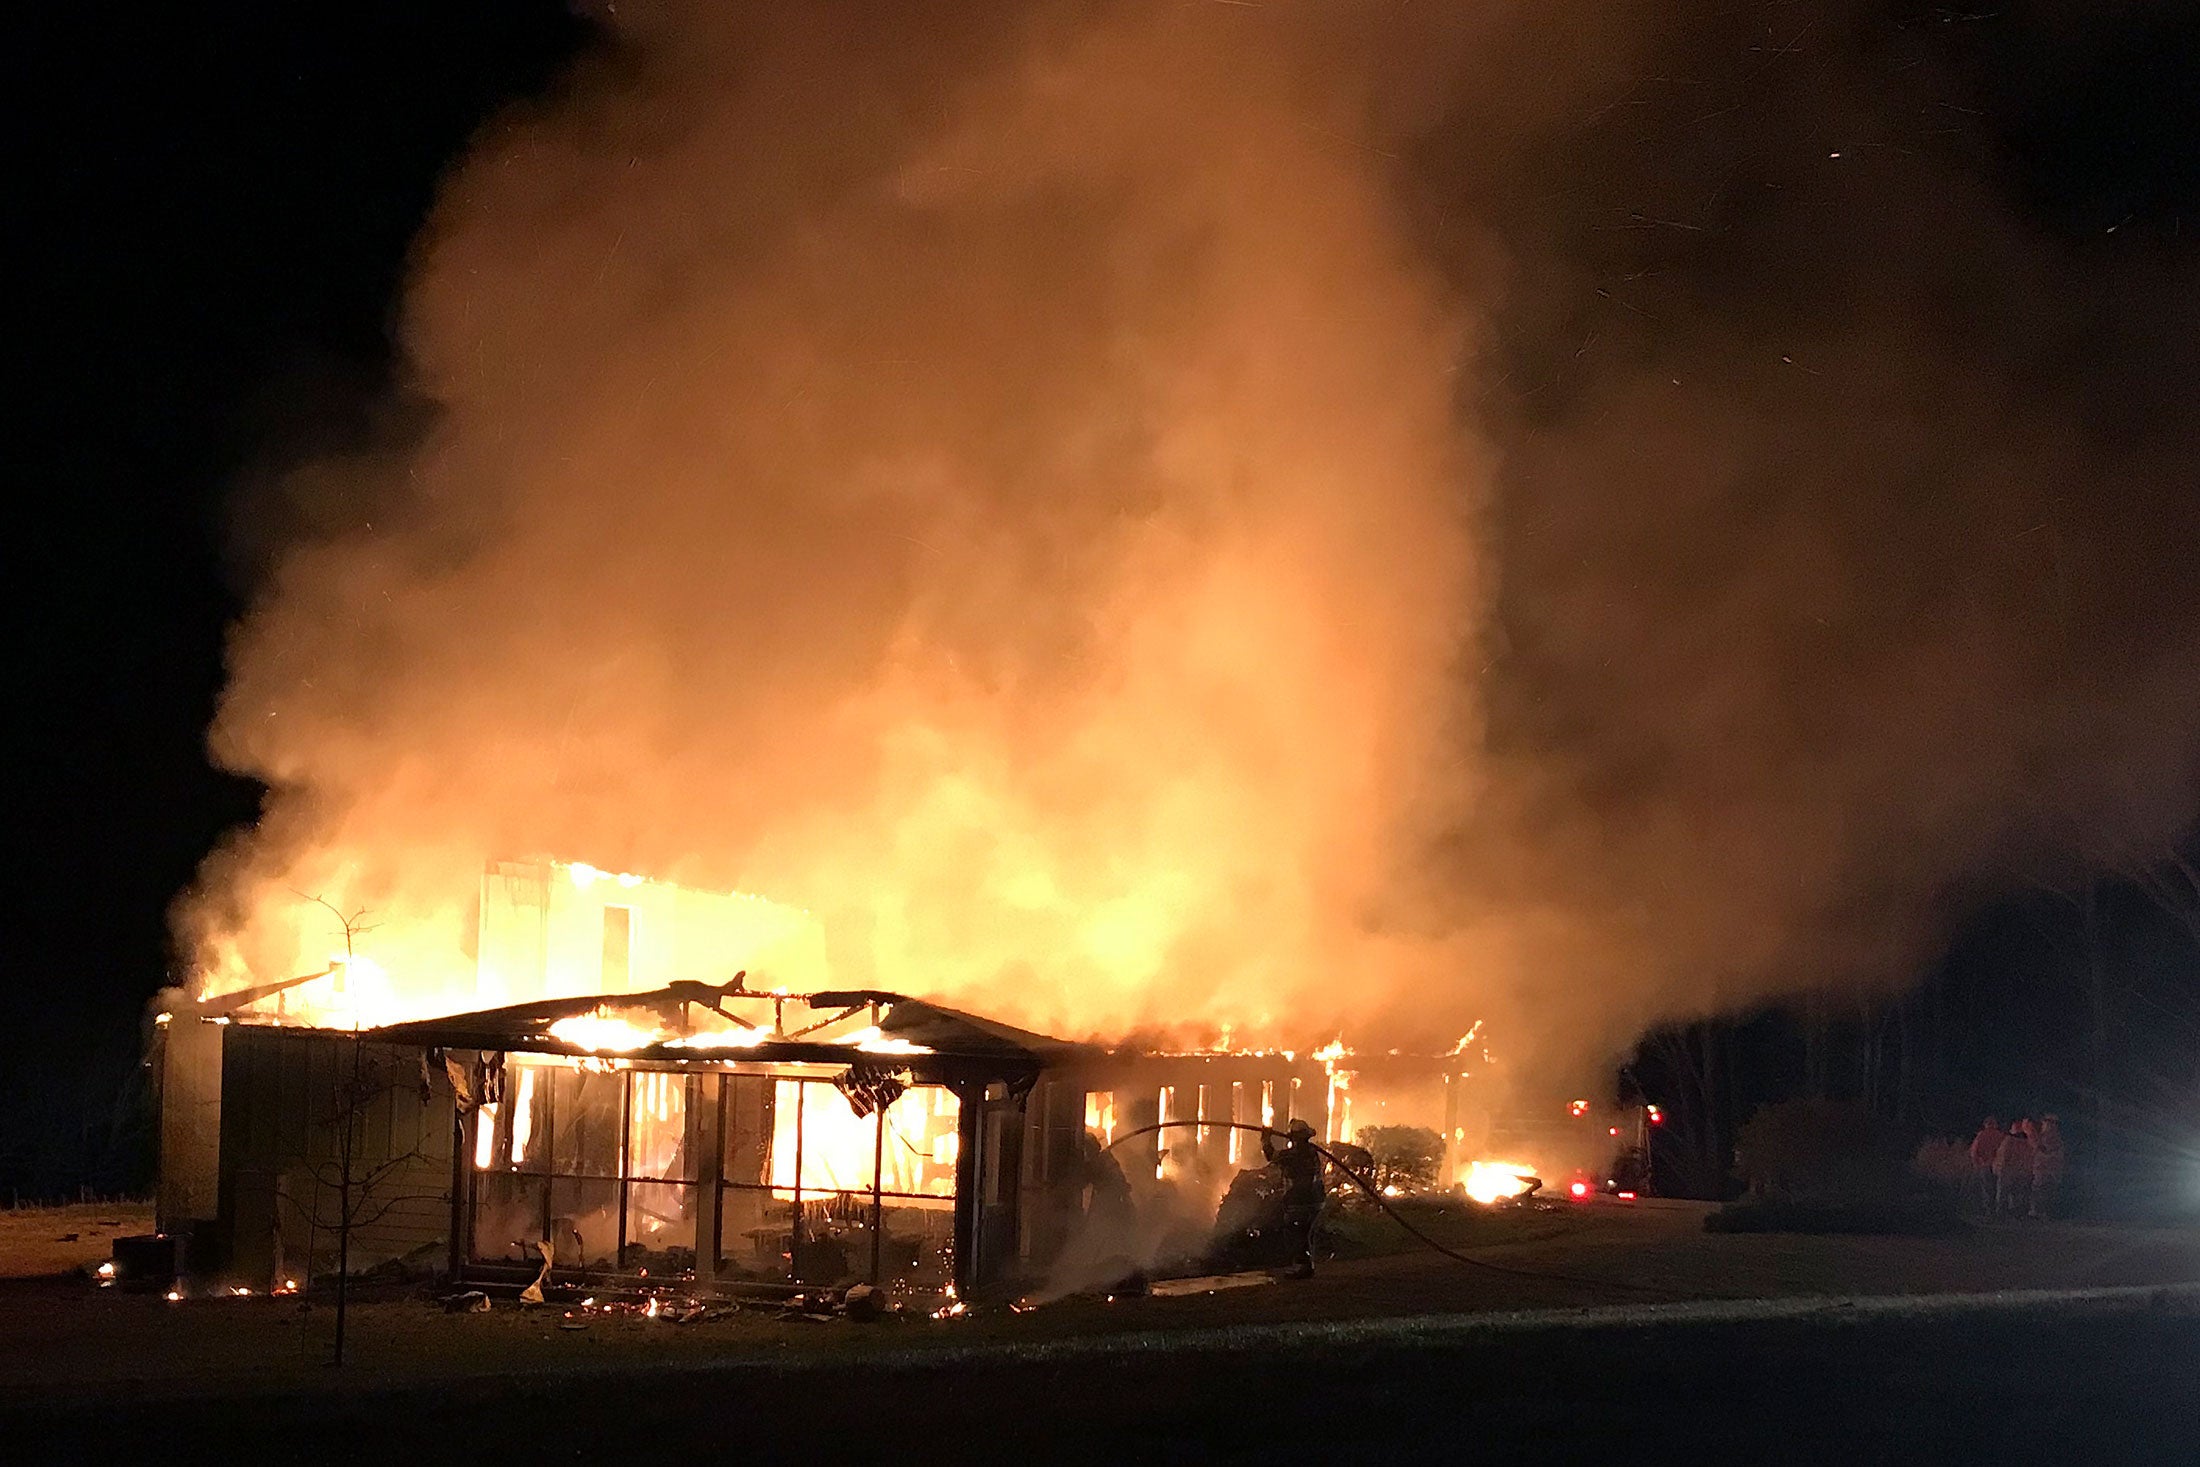 Late at night, fire consuming the structure of the Highlander Education and Research Center in New Market, Tennessee